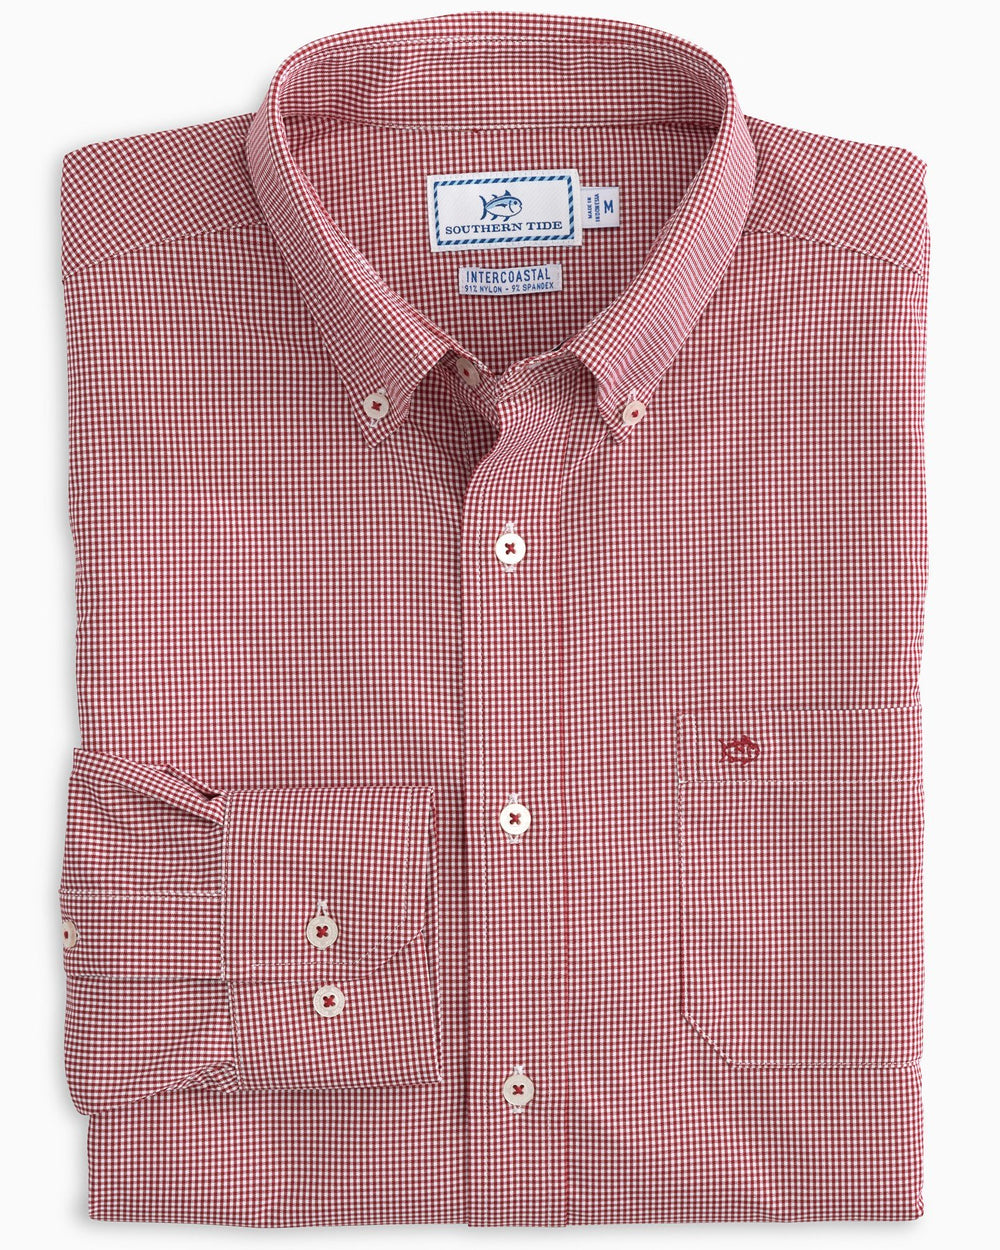 The front view of the Men's Red Micro Gingham Intercoastal Performance Sport Shirt by Southern Tide - true red